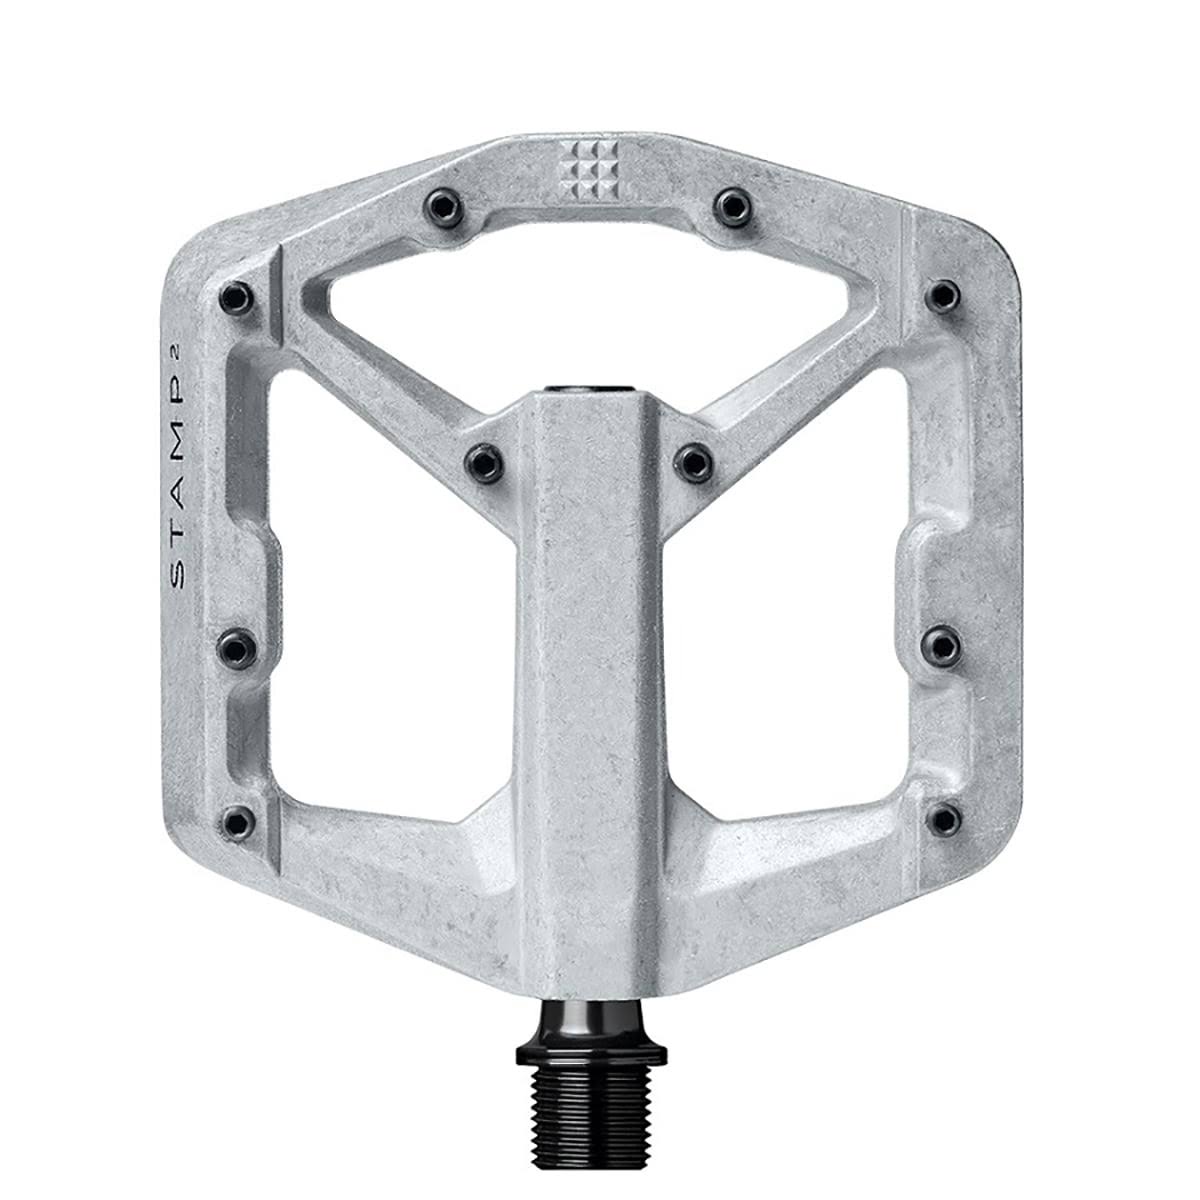 Crank Brothers Stamp 2 Gen2 Pedals Raw - Silver - Large